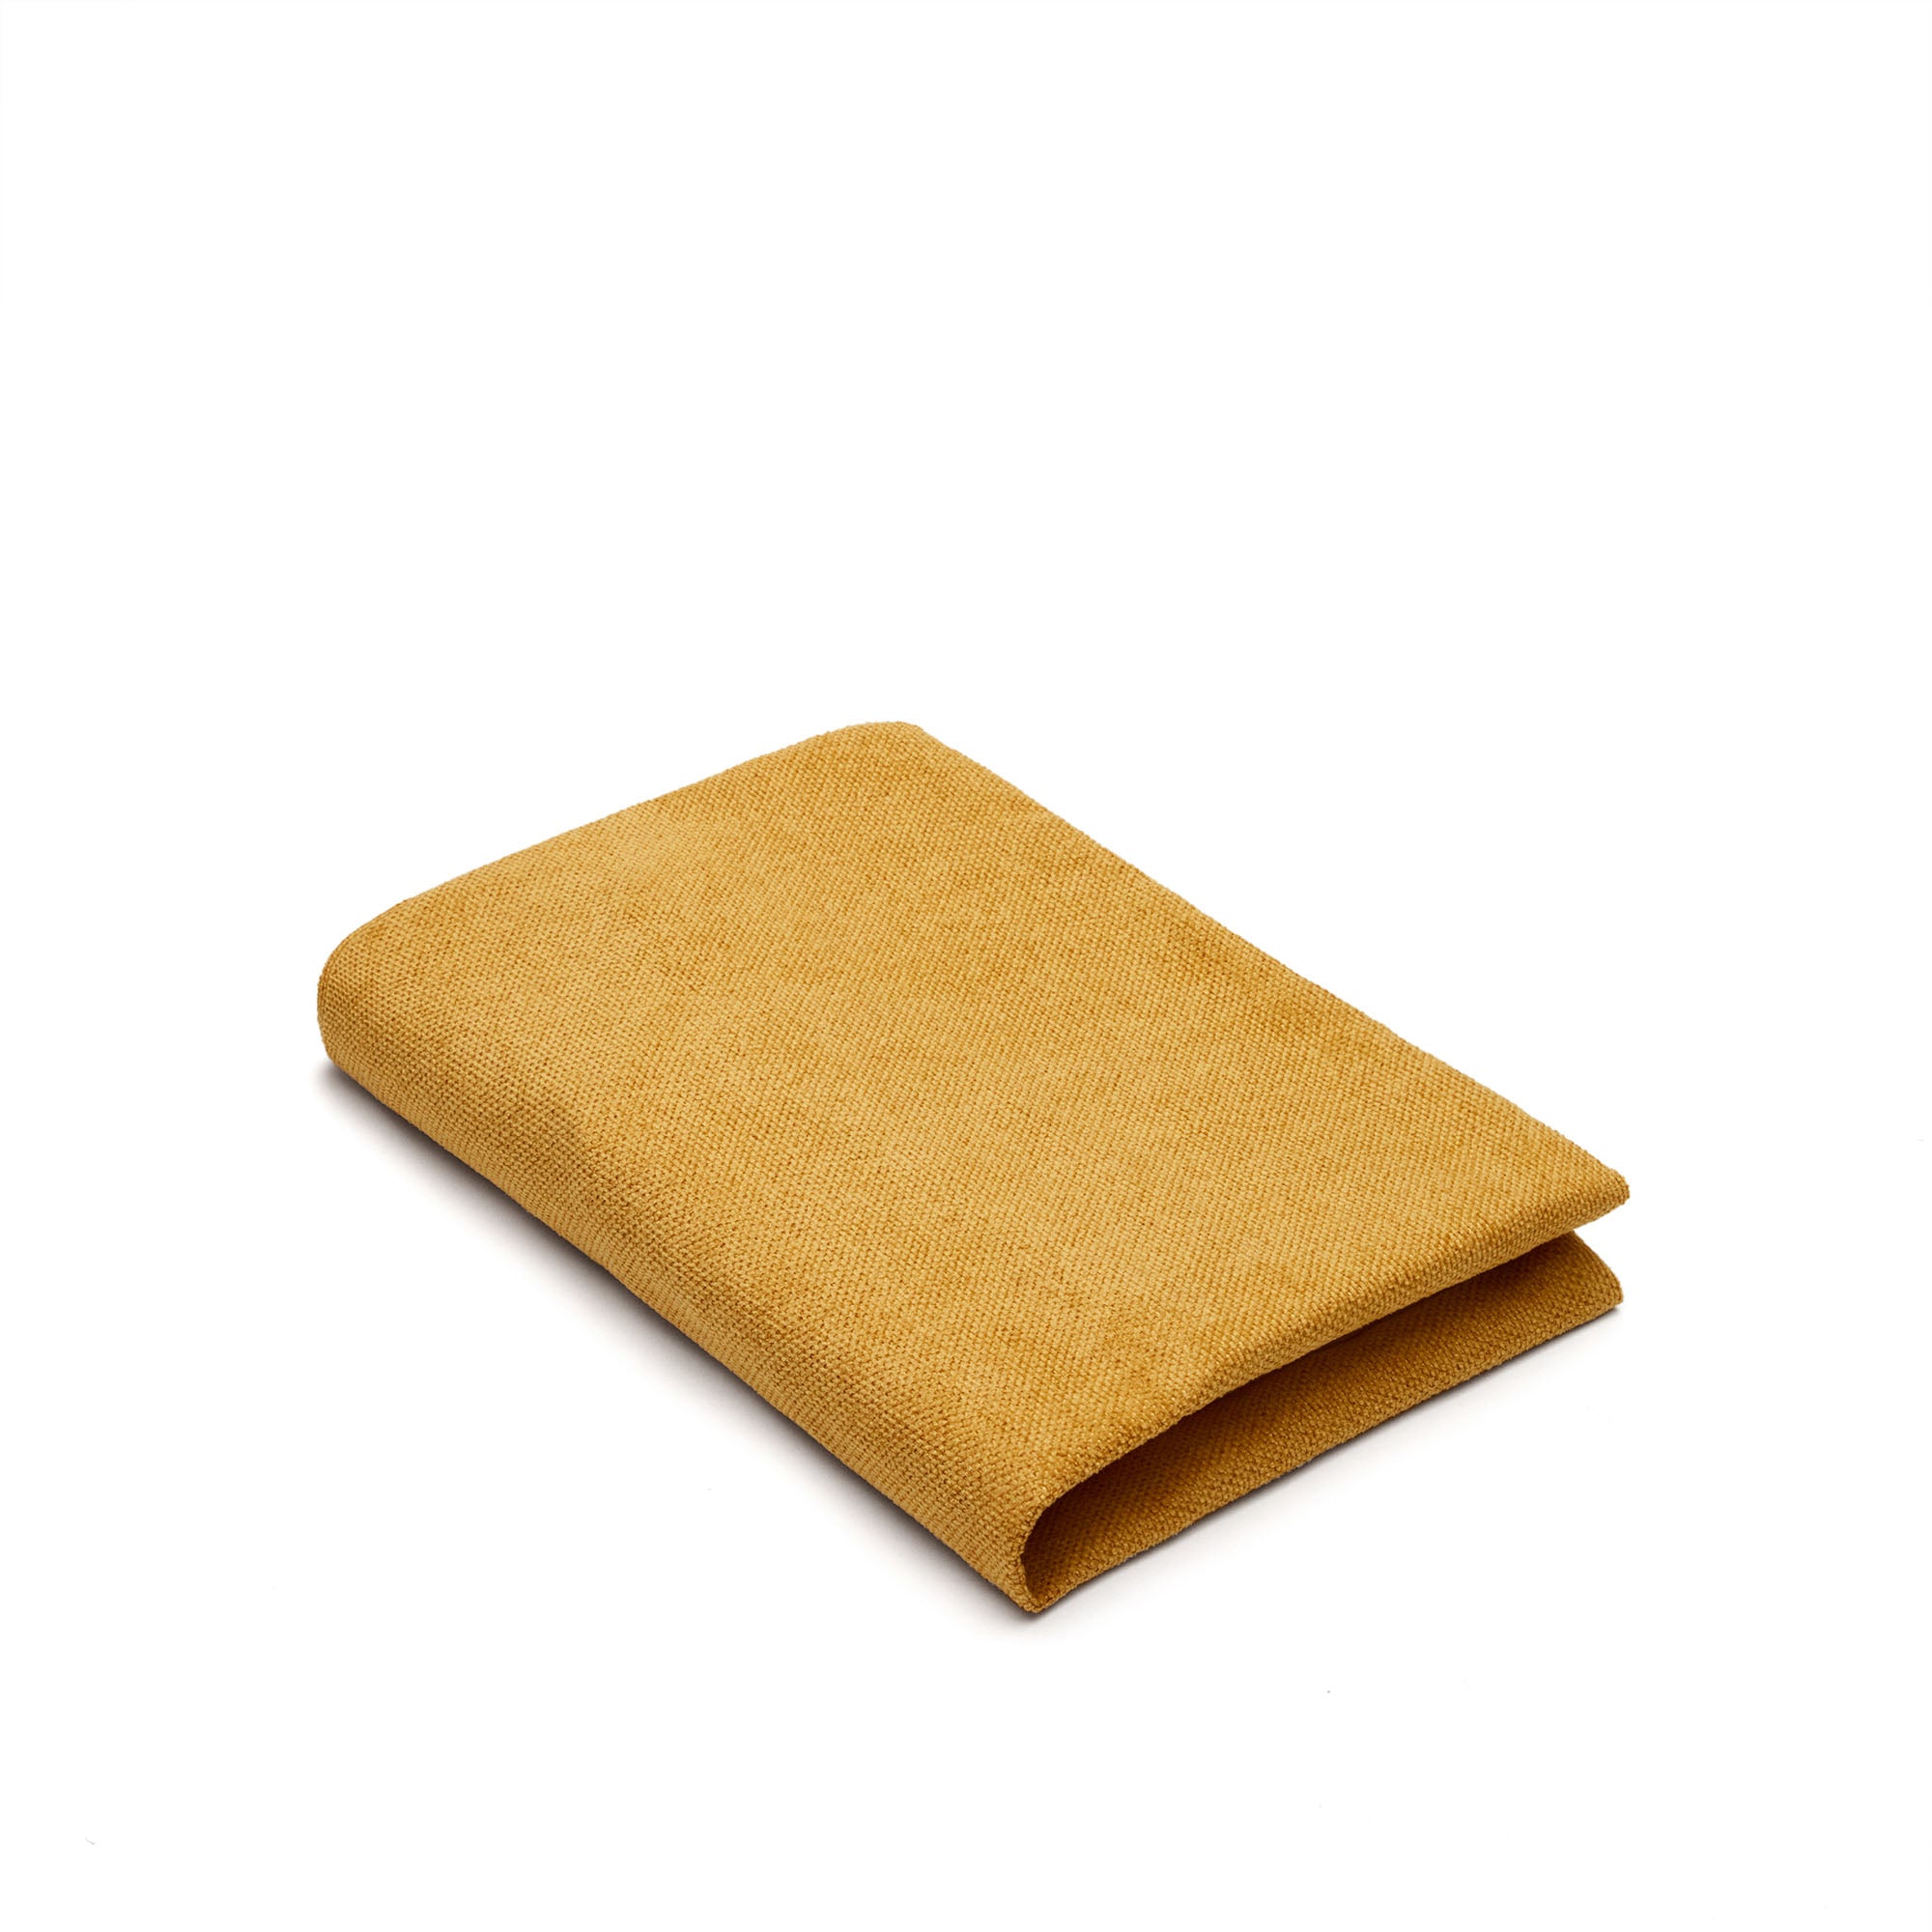 Bowie cover for small bed for pets in mustard, 63 x 80 cm